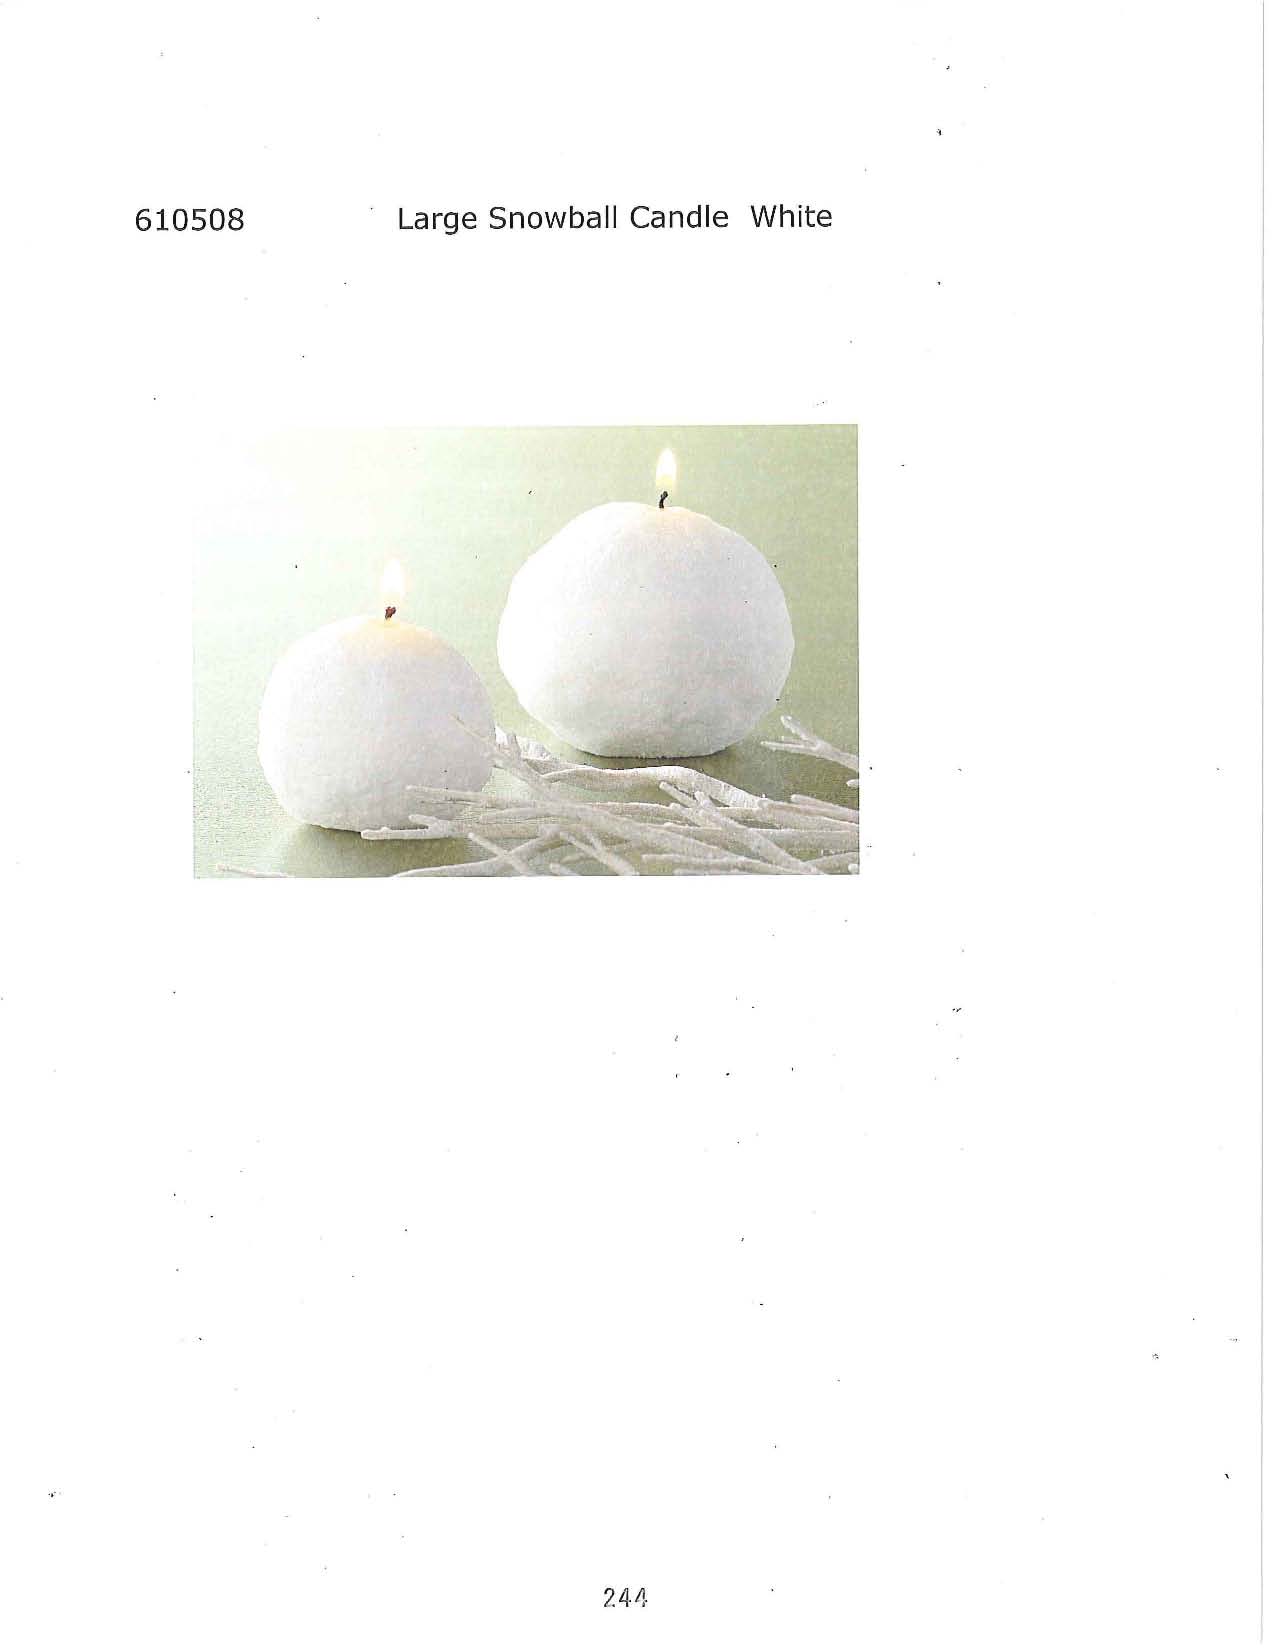 Large Snowball Candle - White